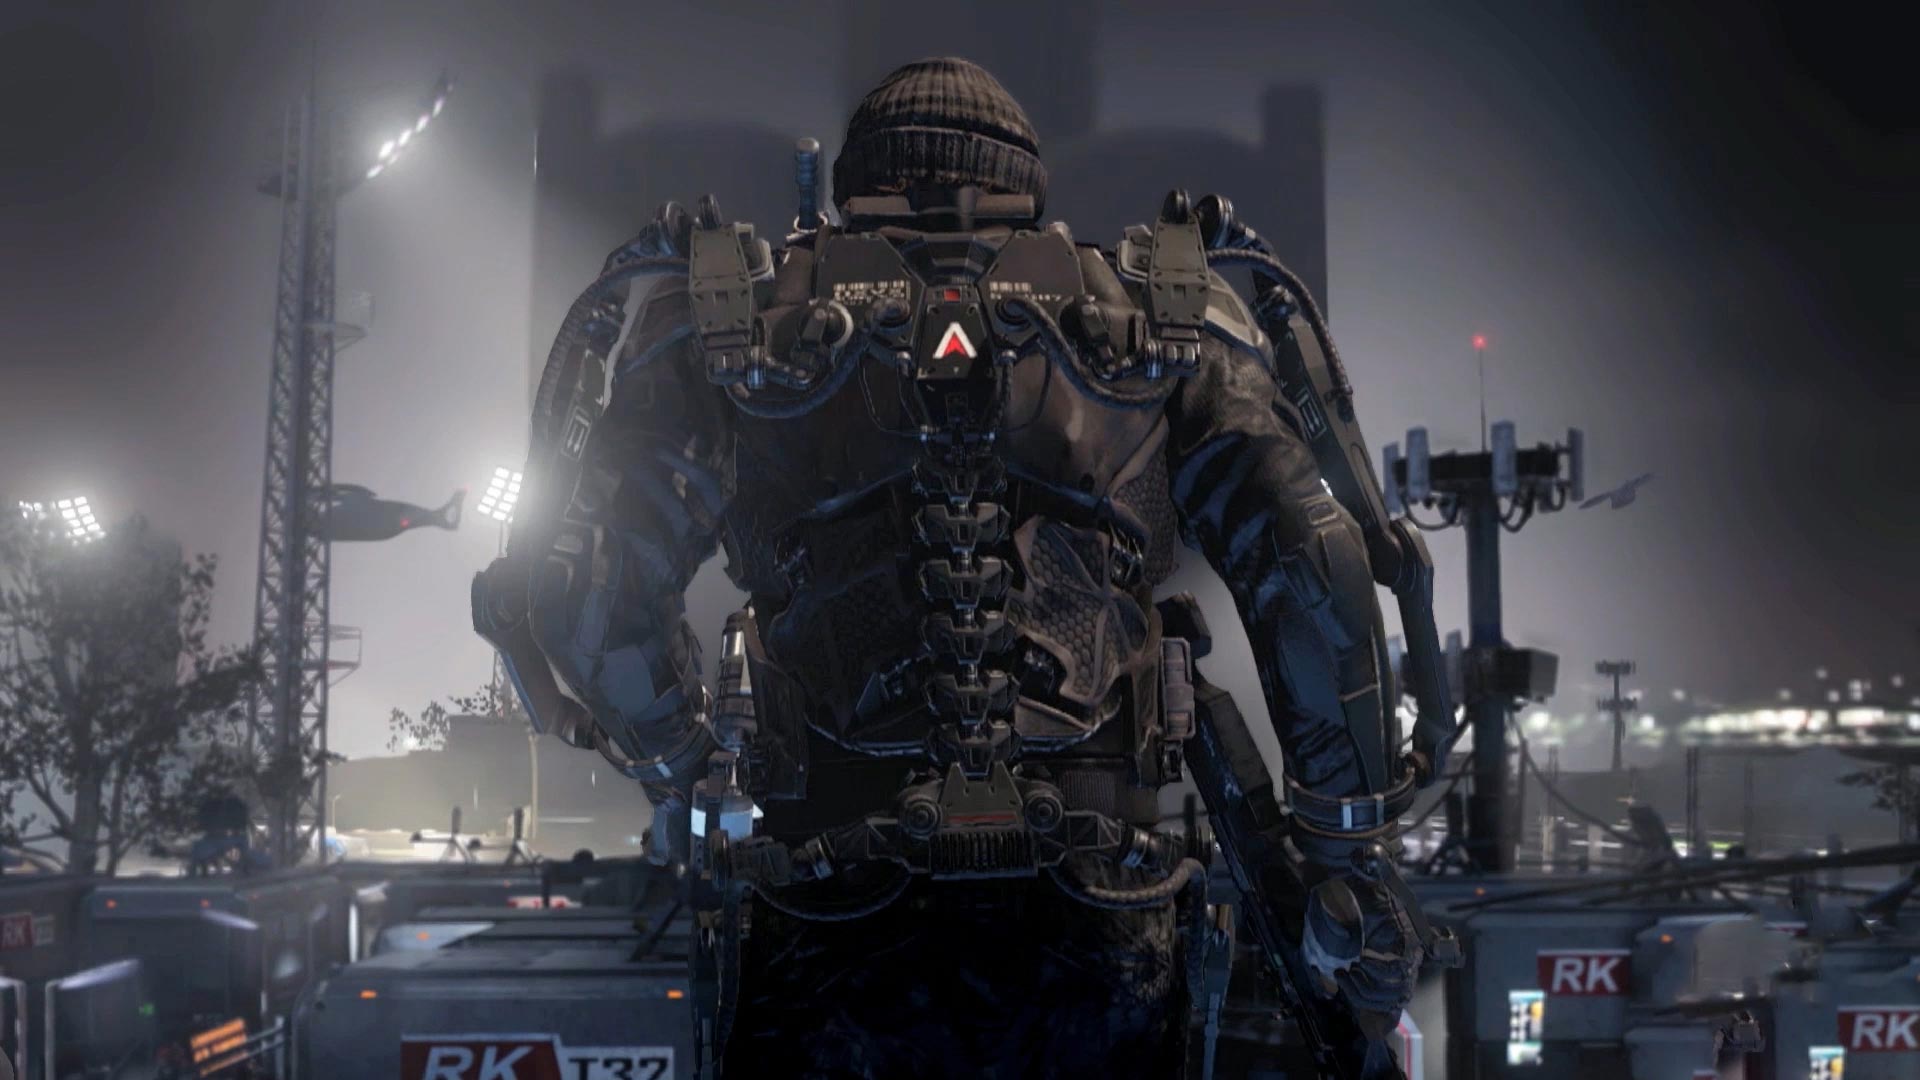 Call Of Duty Like Exoskeleton Can Be Yours For $200 (€455)